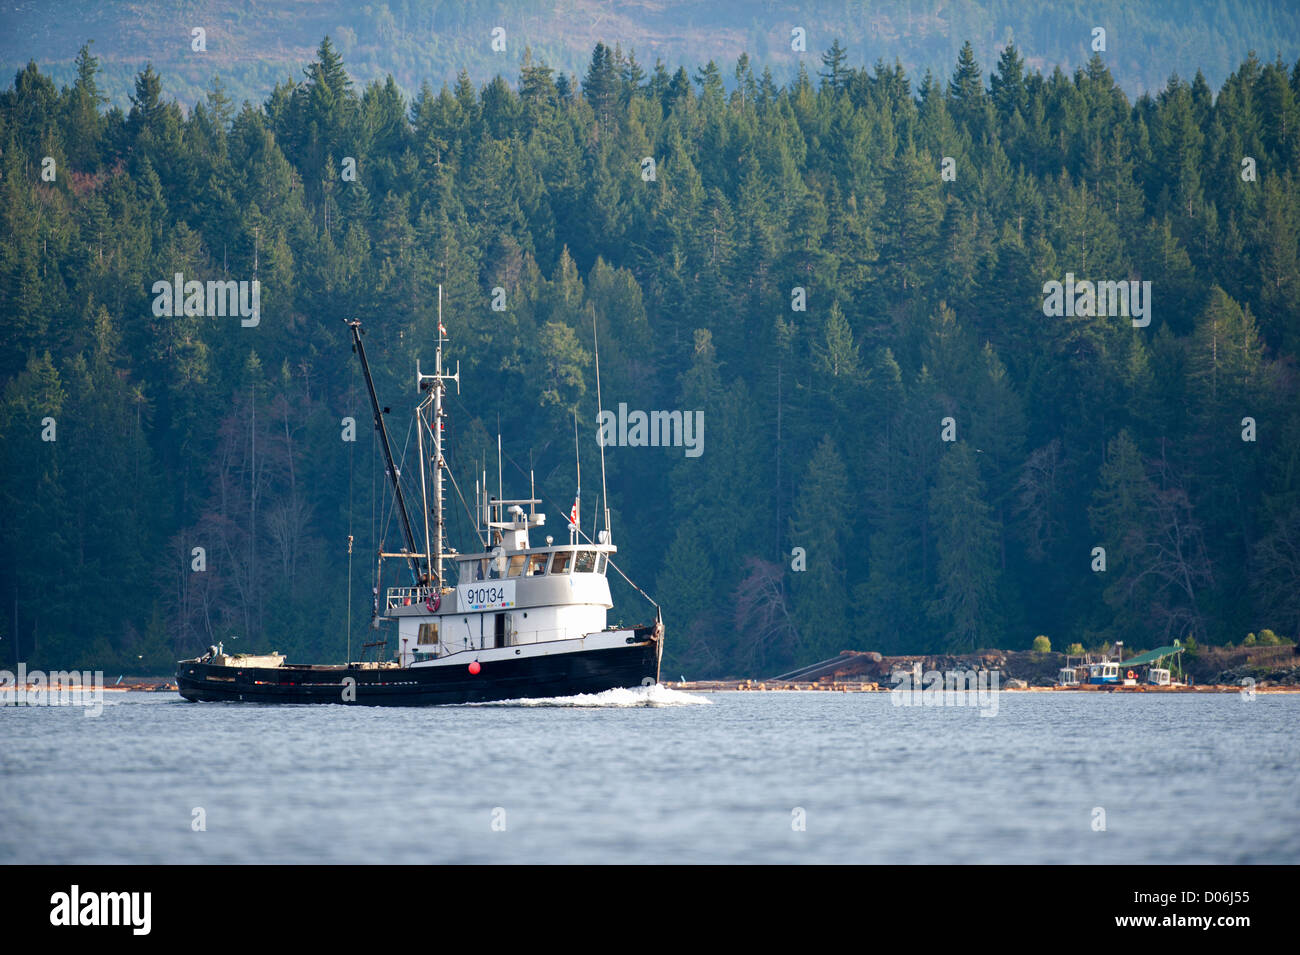 Herring fishing boat working close inshore in the Georgia Straight at ...